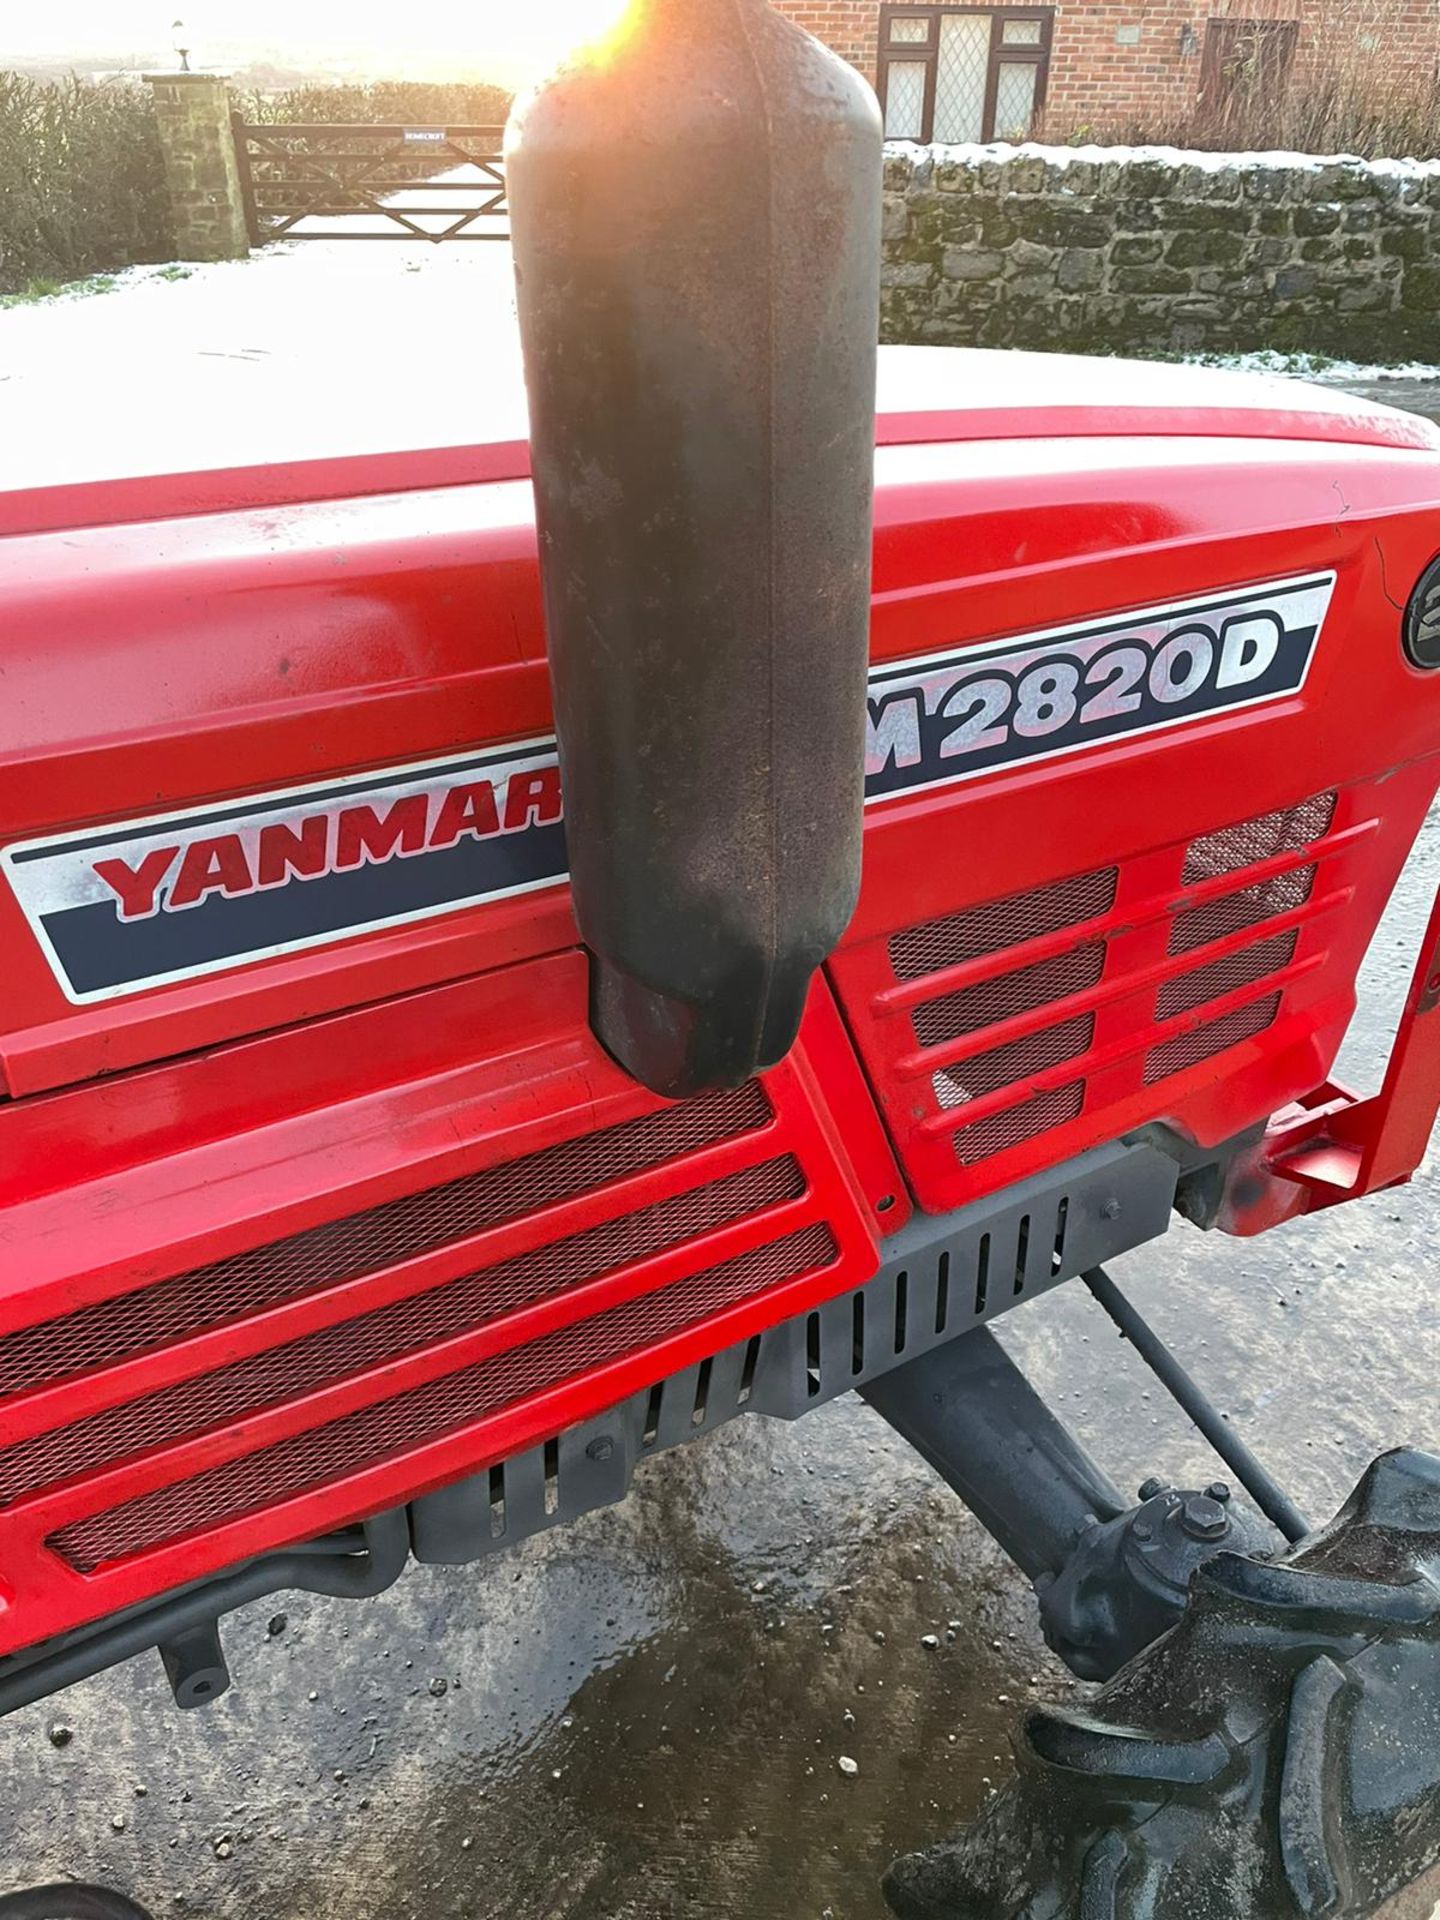 YANMAR YM2820D TRACTOR, 4 WHEEL DRIVE, WITH ROTATOR, RUNS AND WORKS, 3 POINT LINKAGE *PLUS VAT* - Image 8 of 8